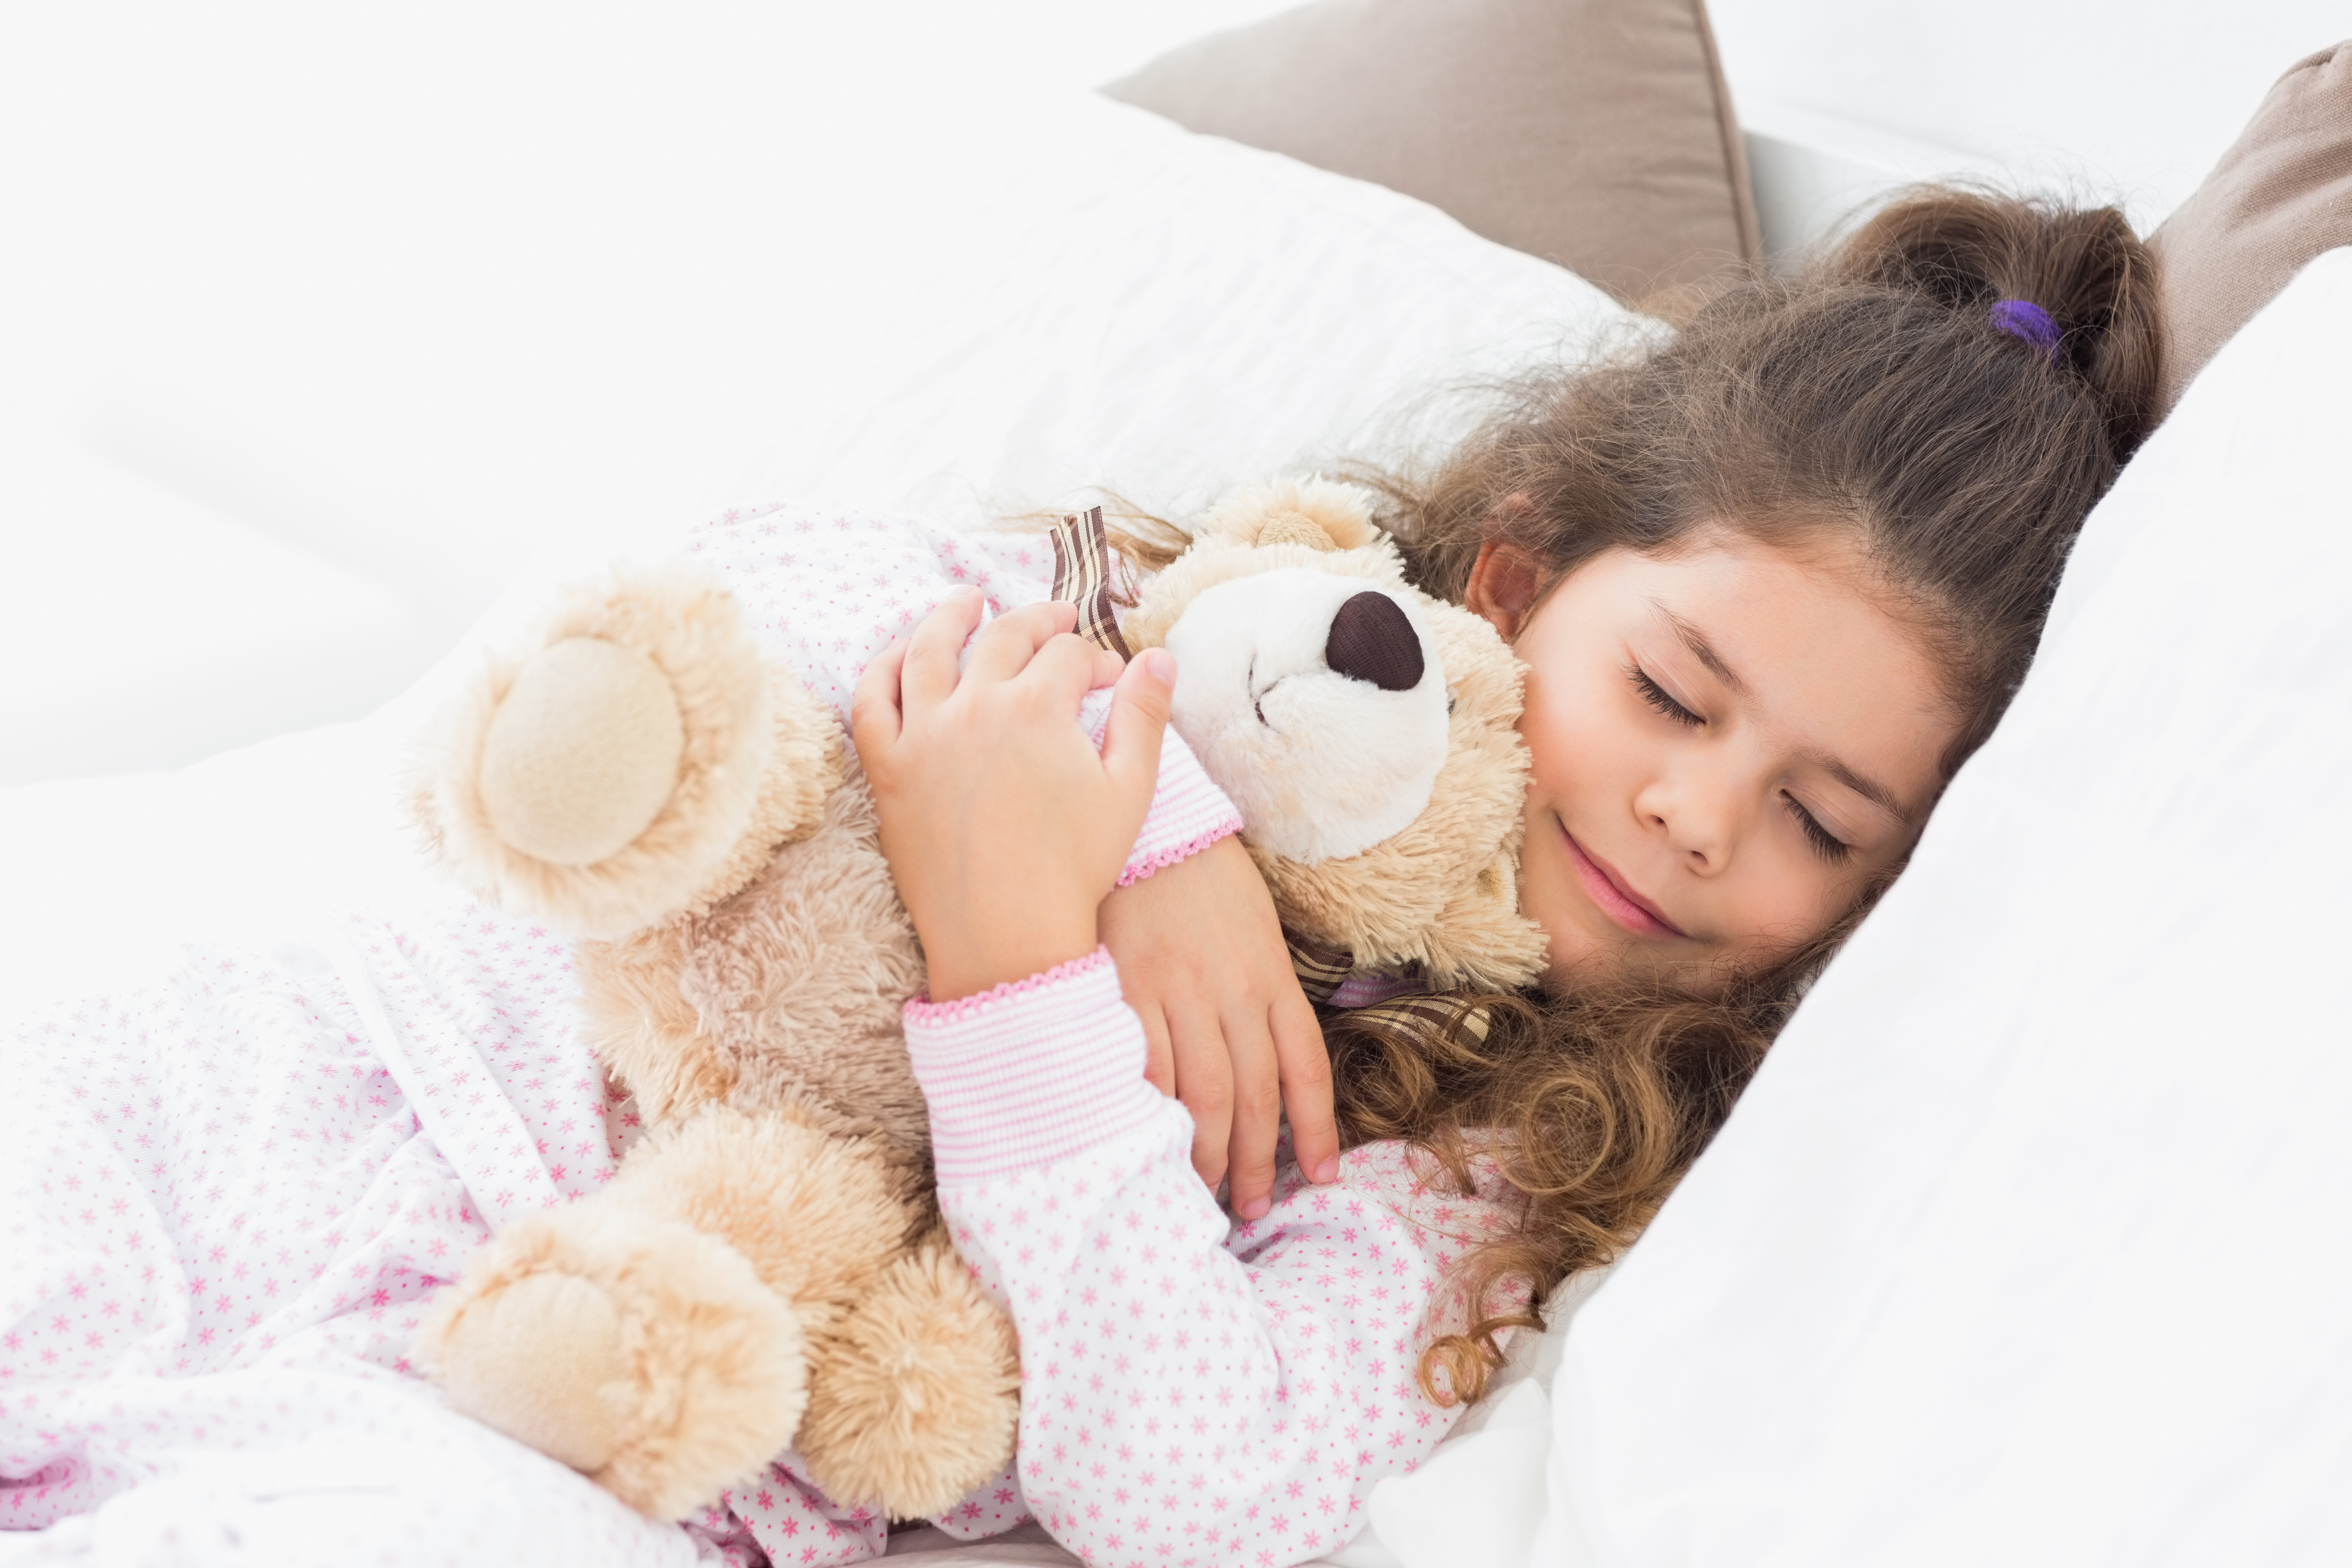 Little girl asleep with her teddy bear in bed